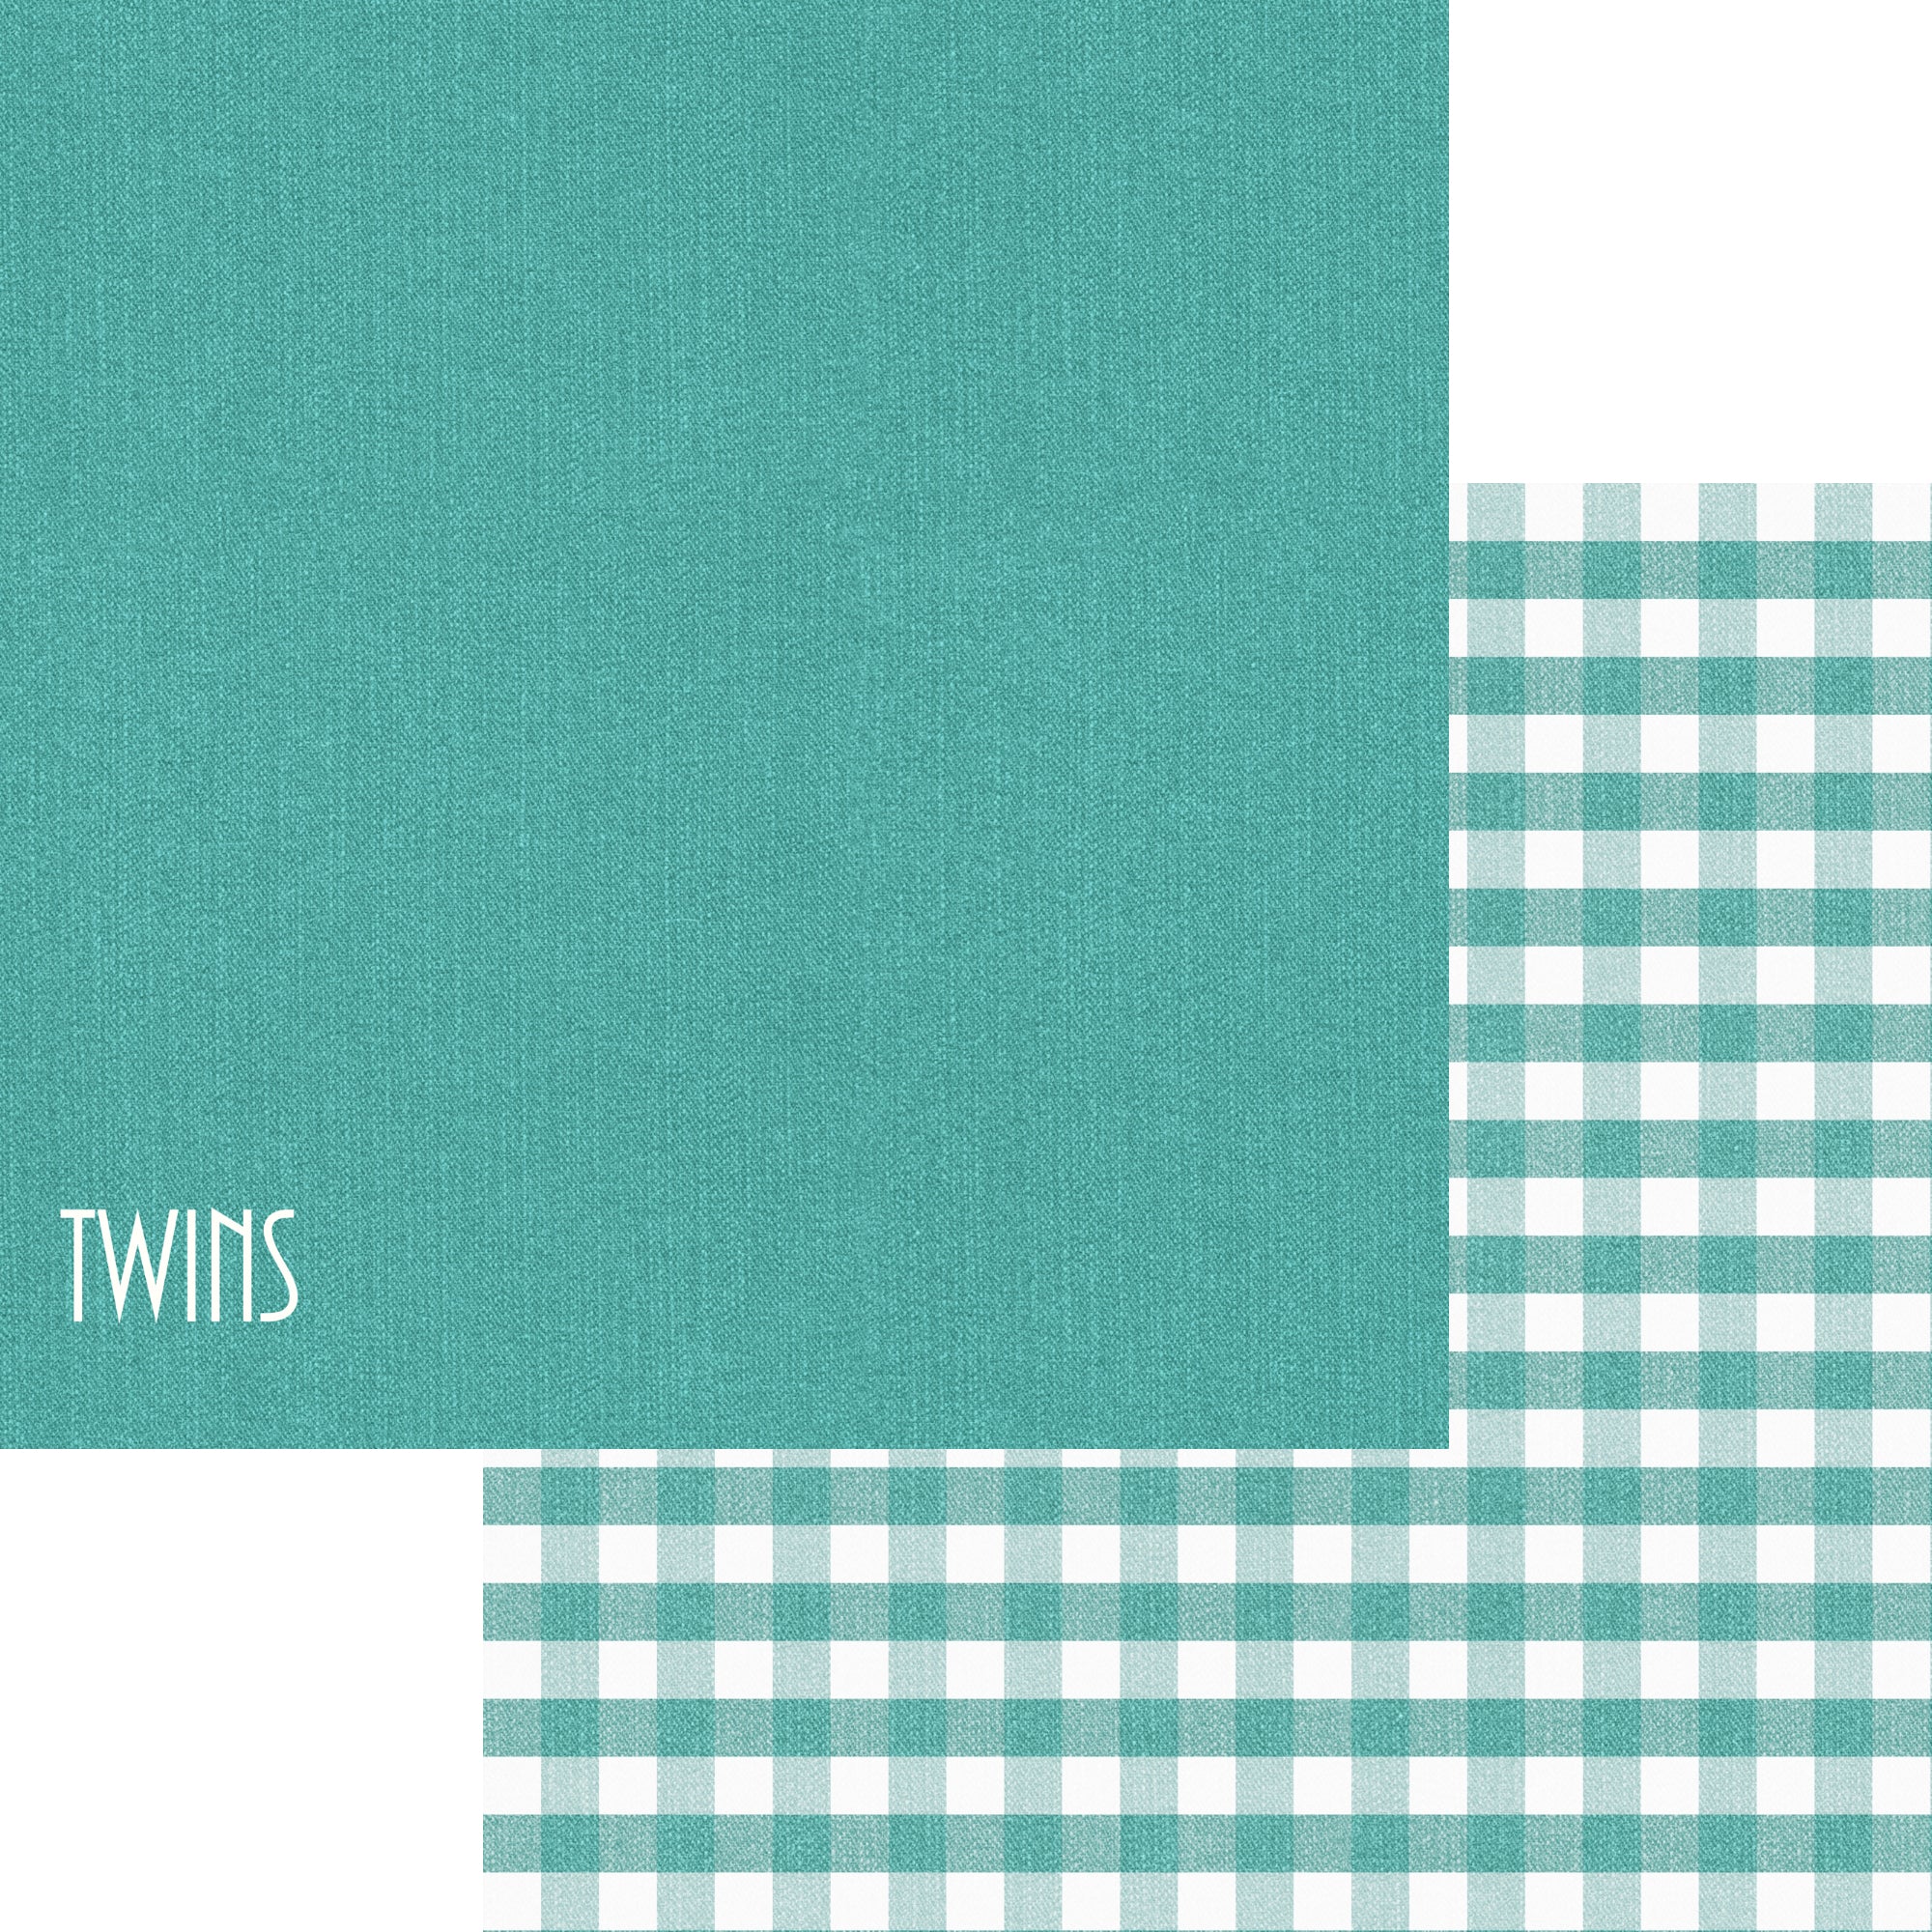 Family Collection Twins 12 x 12 Double-Sided Scrapbook Paper by SSC Designs